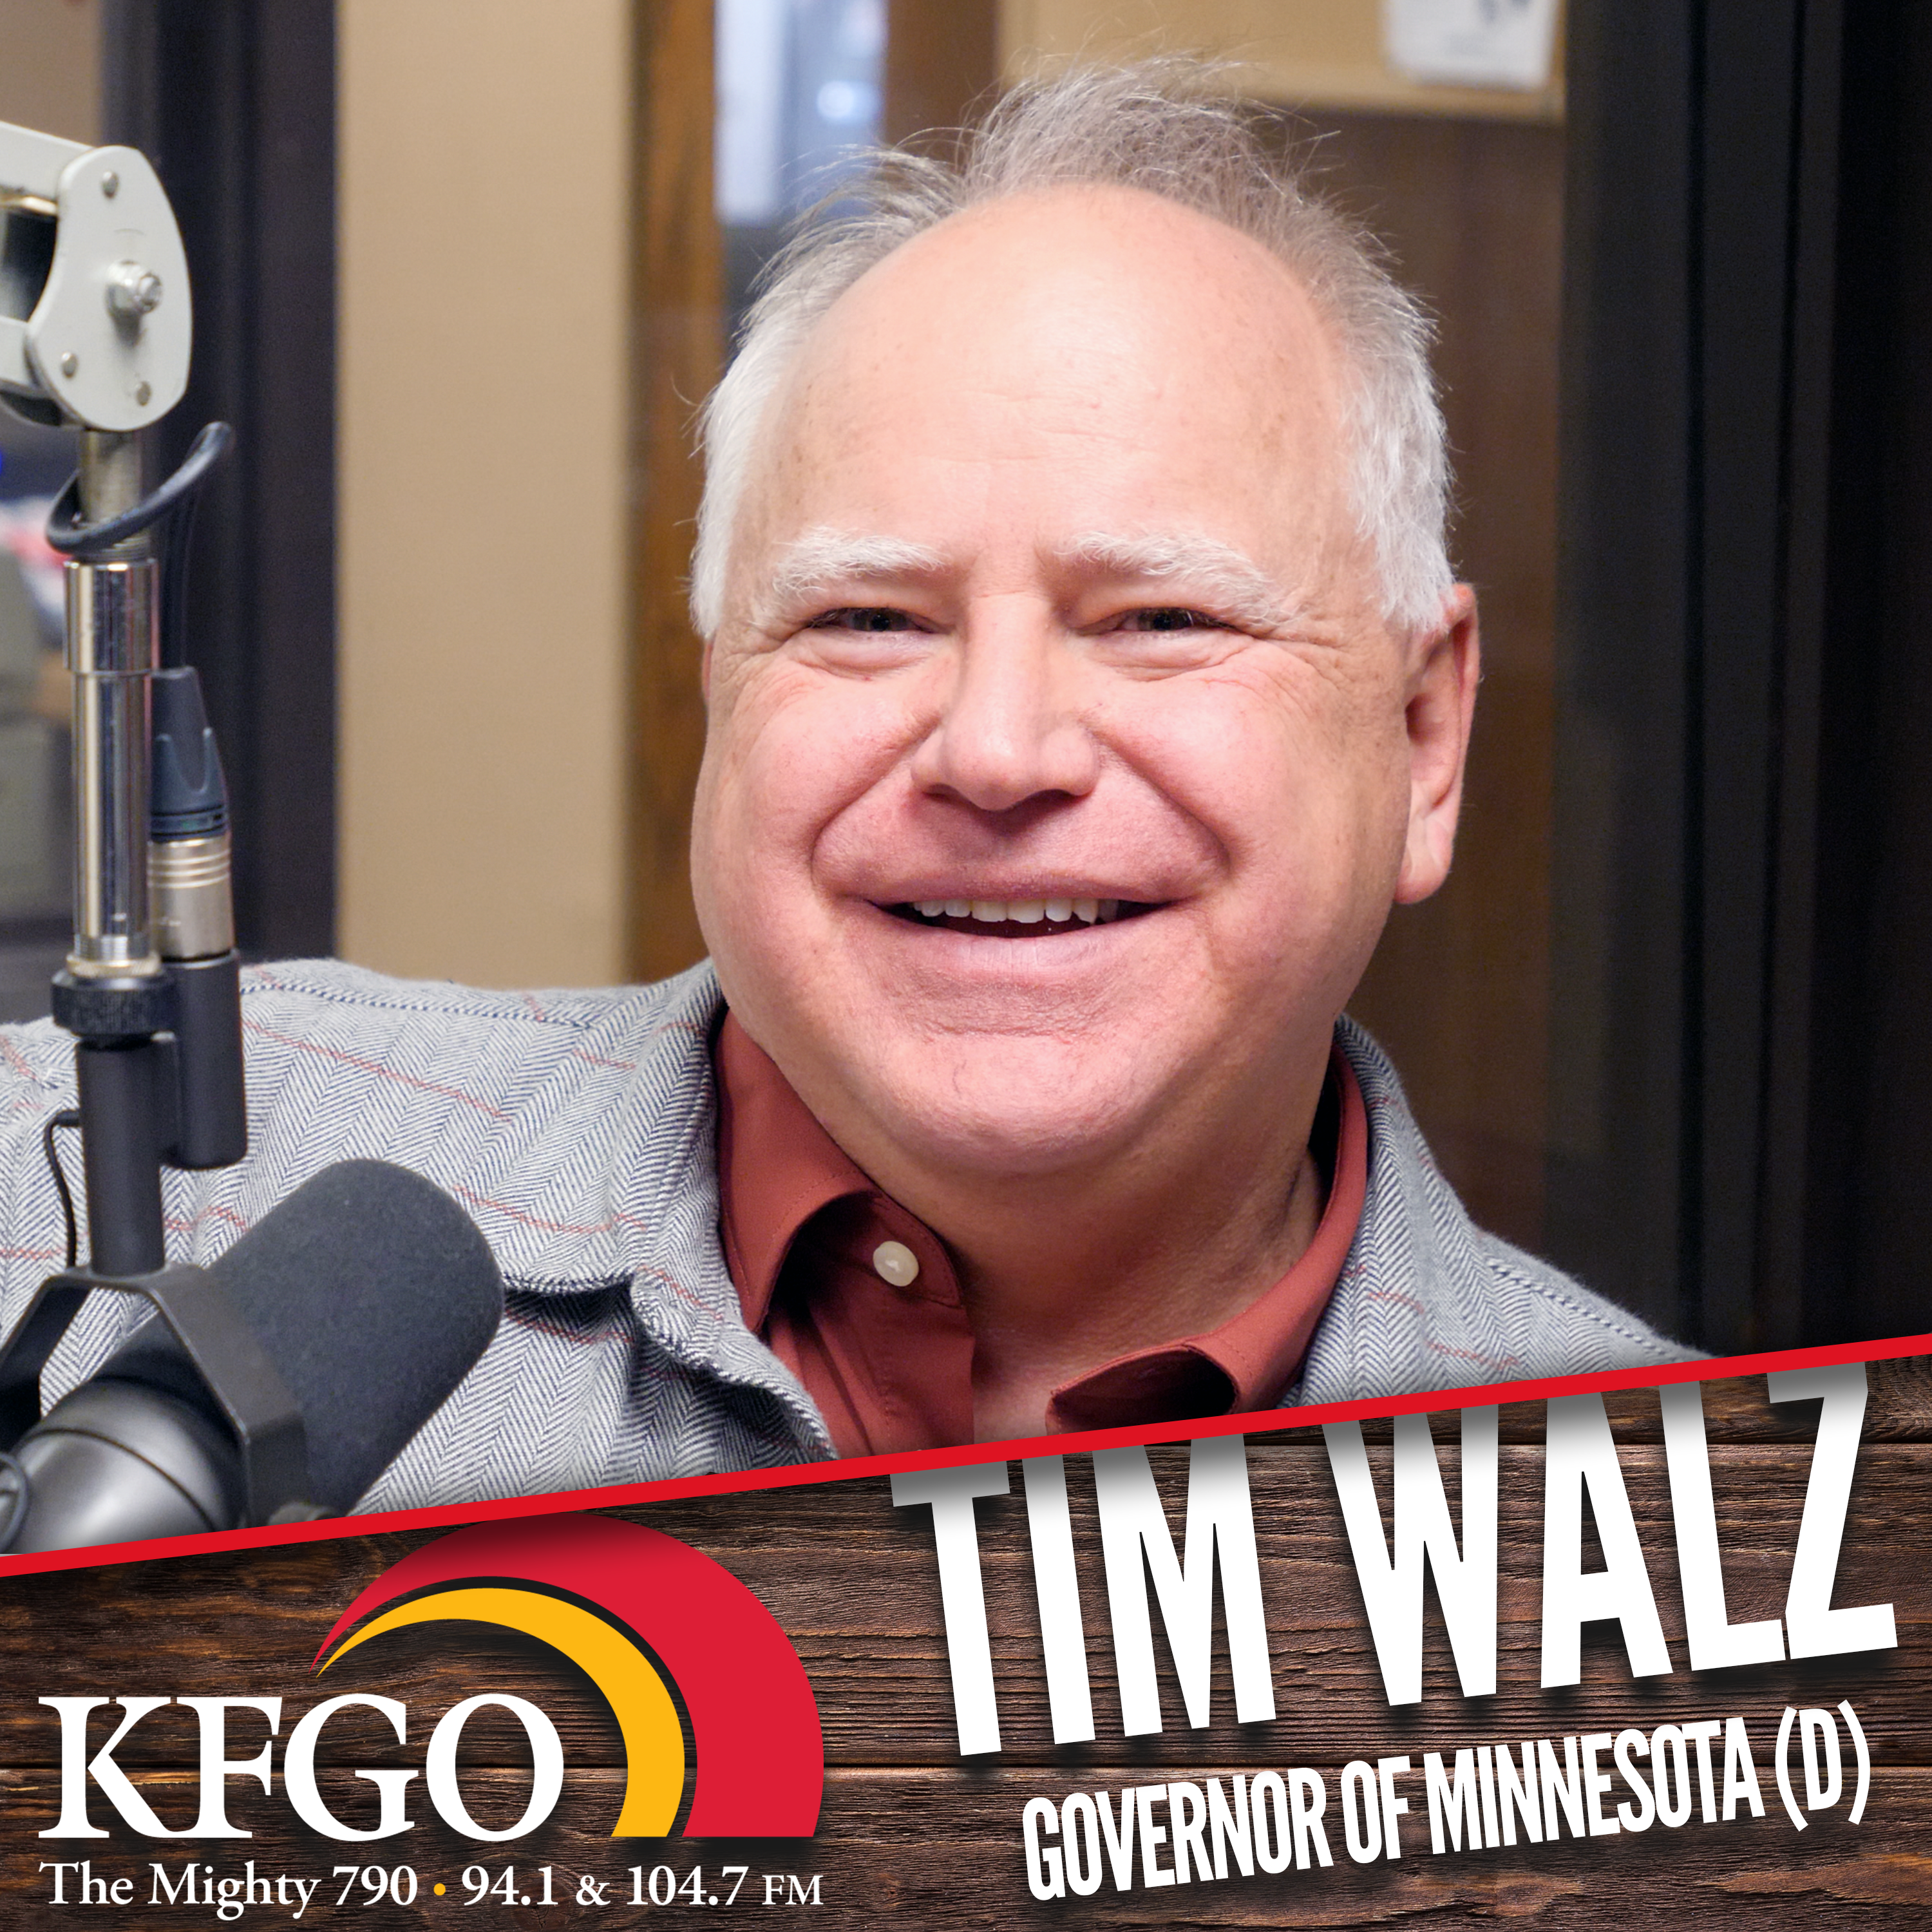 Governor Walz gives his take on the MN legislative session